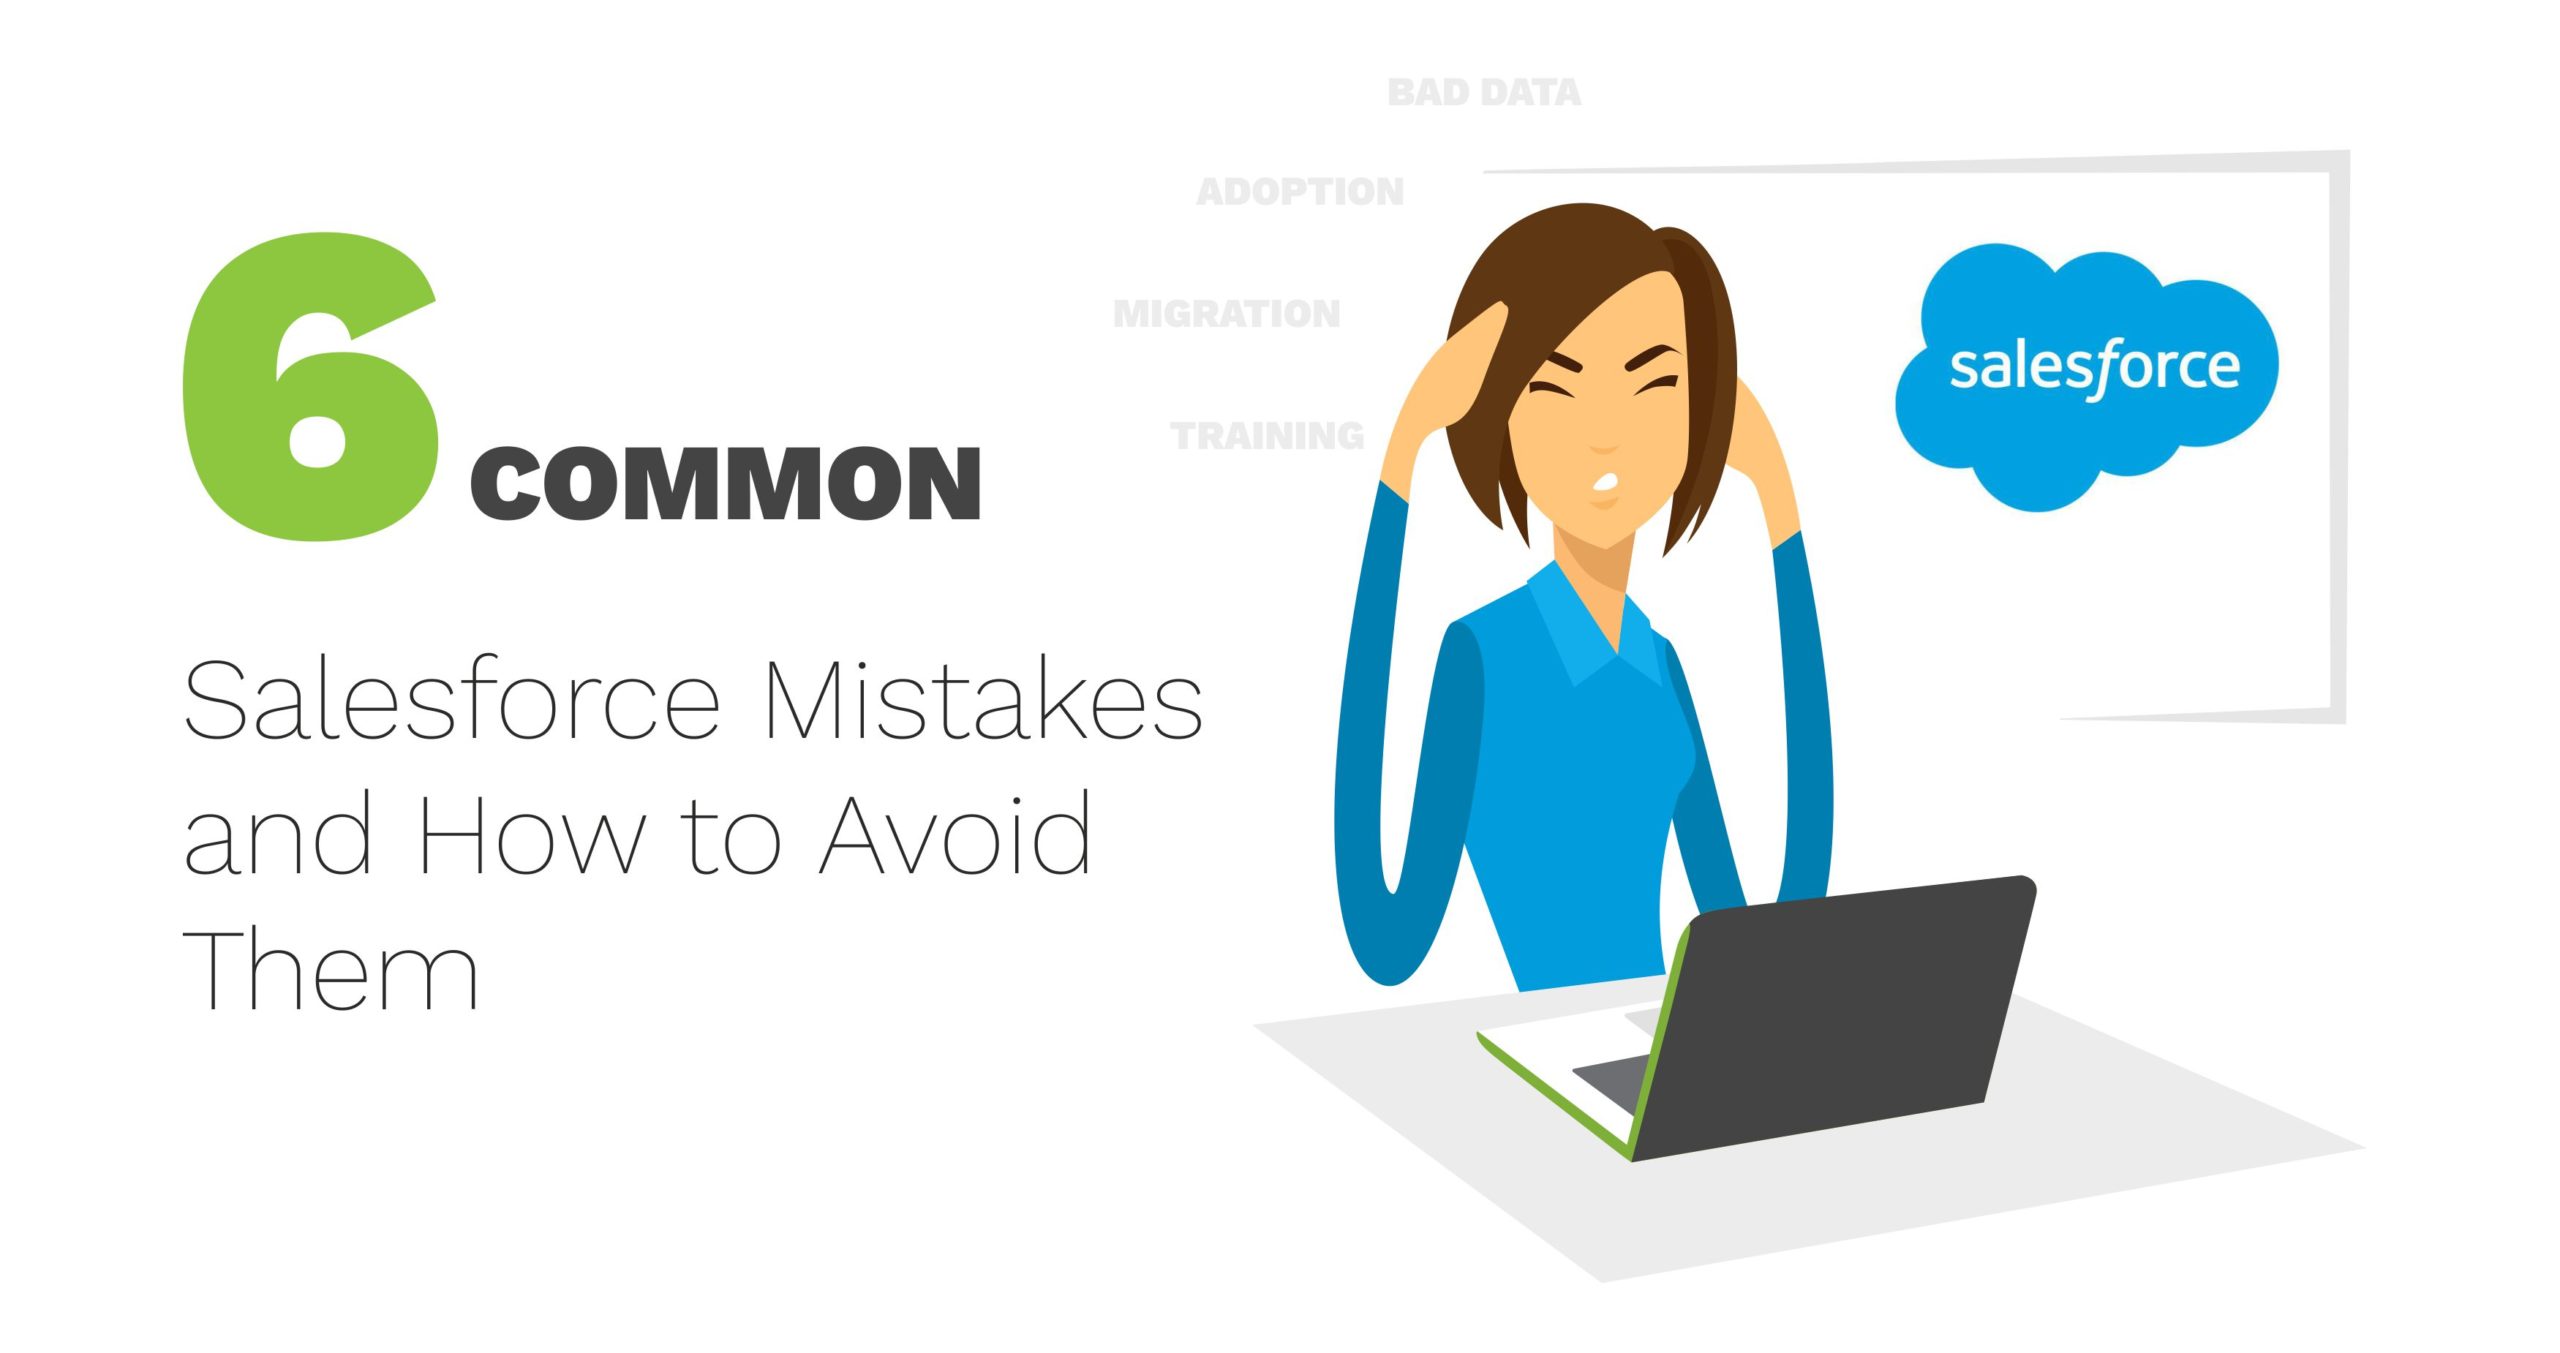 6 Common Salesforce Mistakes and How to Avoid Them